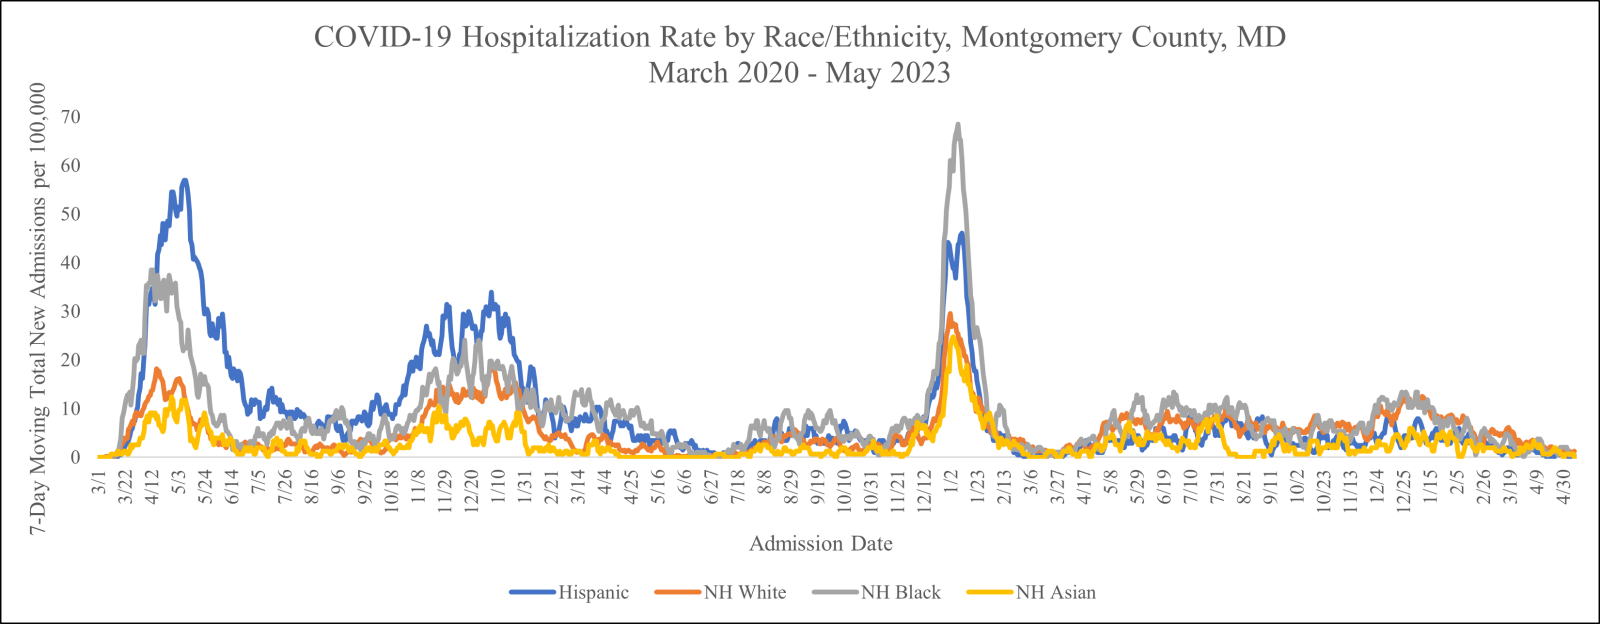 Graph: COVID-19 Hospitalization Rate by Race/Ethnicity from March 2020 to date. Download data files for more detail.